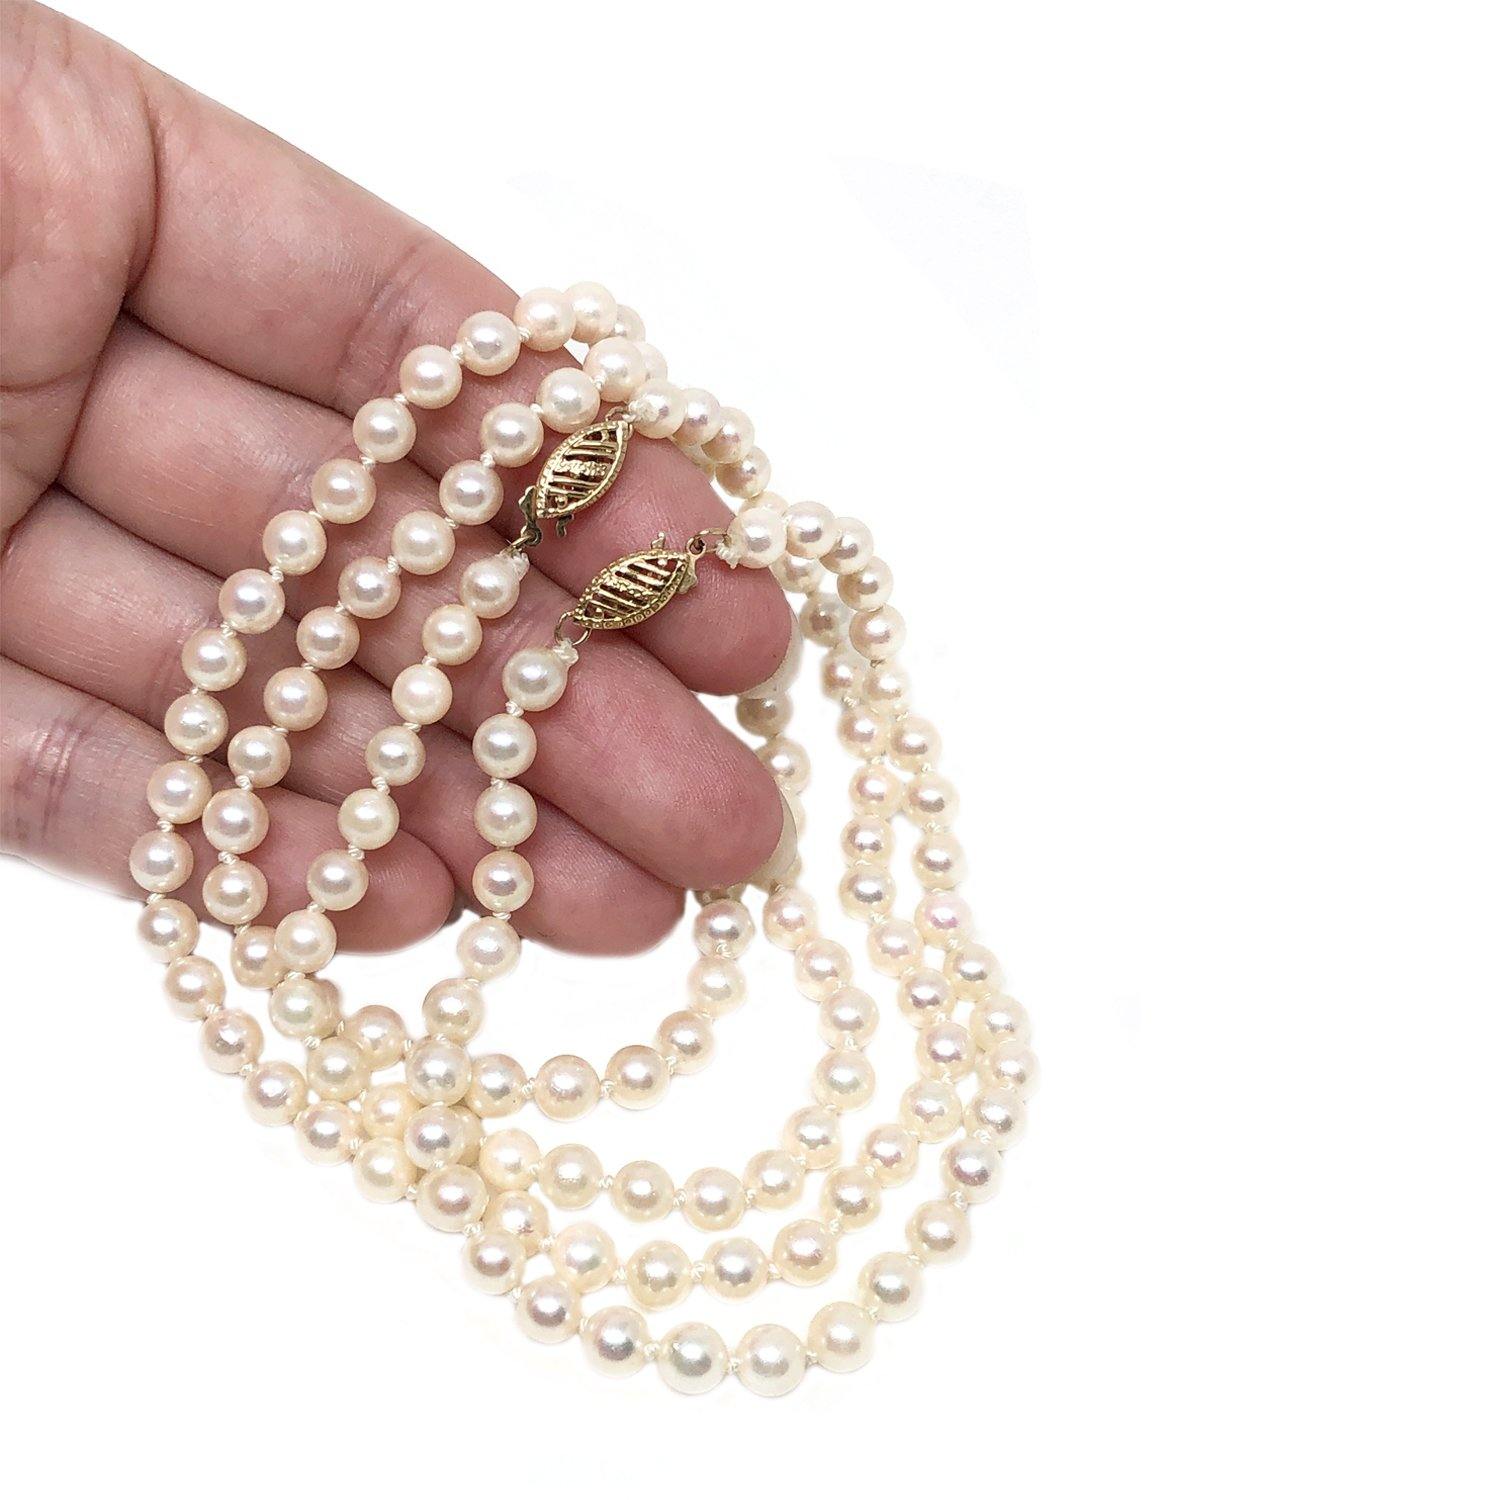 Set Japanese Saltwater Cultured Akoya Pearl Necklace & Bracelet - 14K Yellow Gold 26 Inch